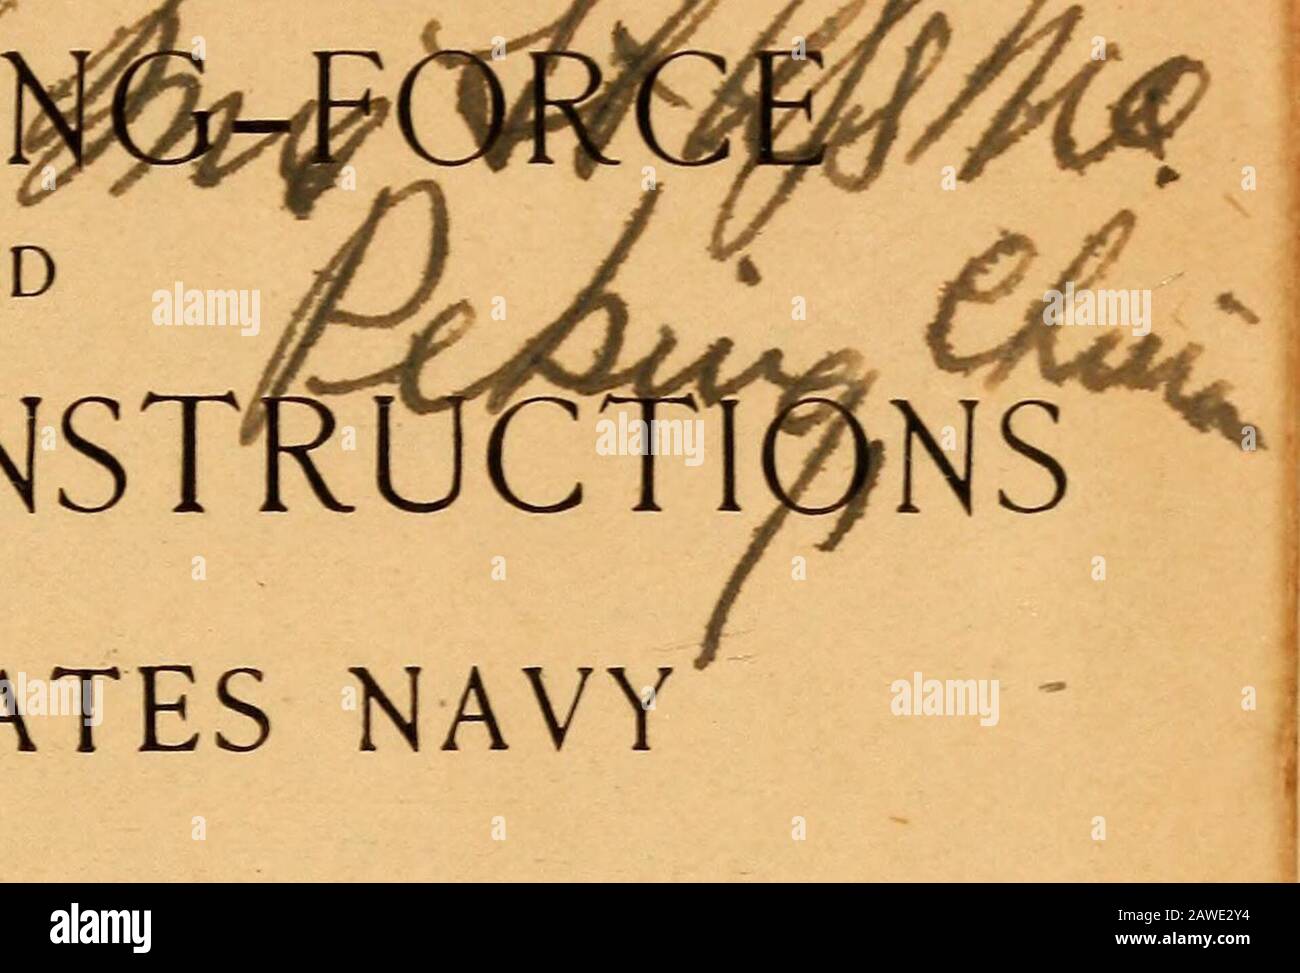 The landing-force and small-arm instructions, United States Navy, 1905 . CLAYTON B. VOGEL .COLLECJJOl THE LAND&. AND SMALL-ARM INSTKOC UNITED STATES NAVY1905 HKPUU * PREPARED UNDER THE DIRECTION OF THE BUREAU* OF NAVIGATION, NAVY DEPARTMENT • BY A BOARD COMPOSED OF Lieutenant-Commander W. F. FULLAM, U. S. NavyLieutenant-Commander W. S. SIMS, U. S. NavyLieutenant-Commander W. R. SHOEMAKER, U. S. NavyLieutenant C. B. BRITTAIN, U. S. NavyLieutenant RIDLEY McLEAN, U. S. Navy fctRYTON B. vogh: COLTE^O*? NAVAL INSTITUTE, ANNAPOLIS, MD,1905 PREFACE The subject-matter of this book is divided into part Stock Photo